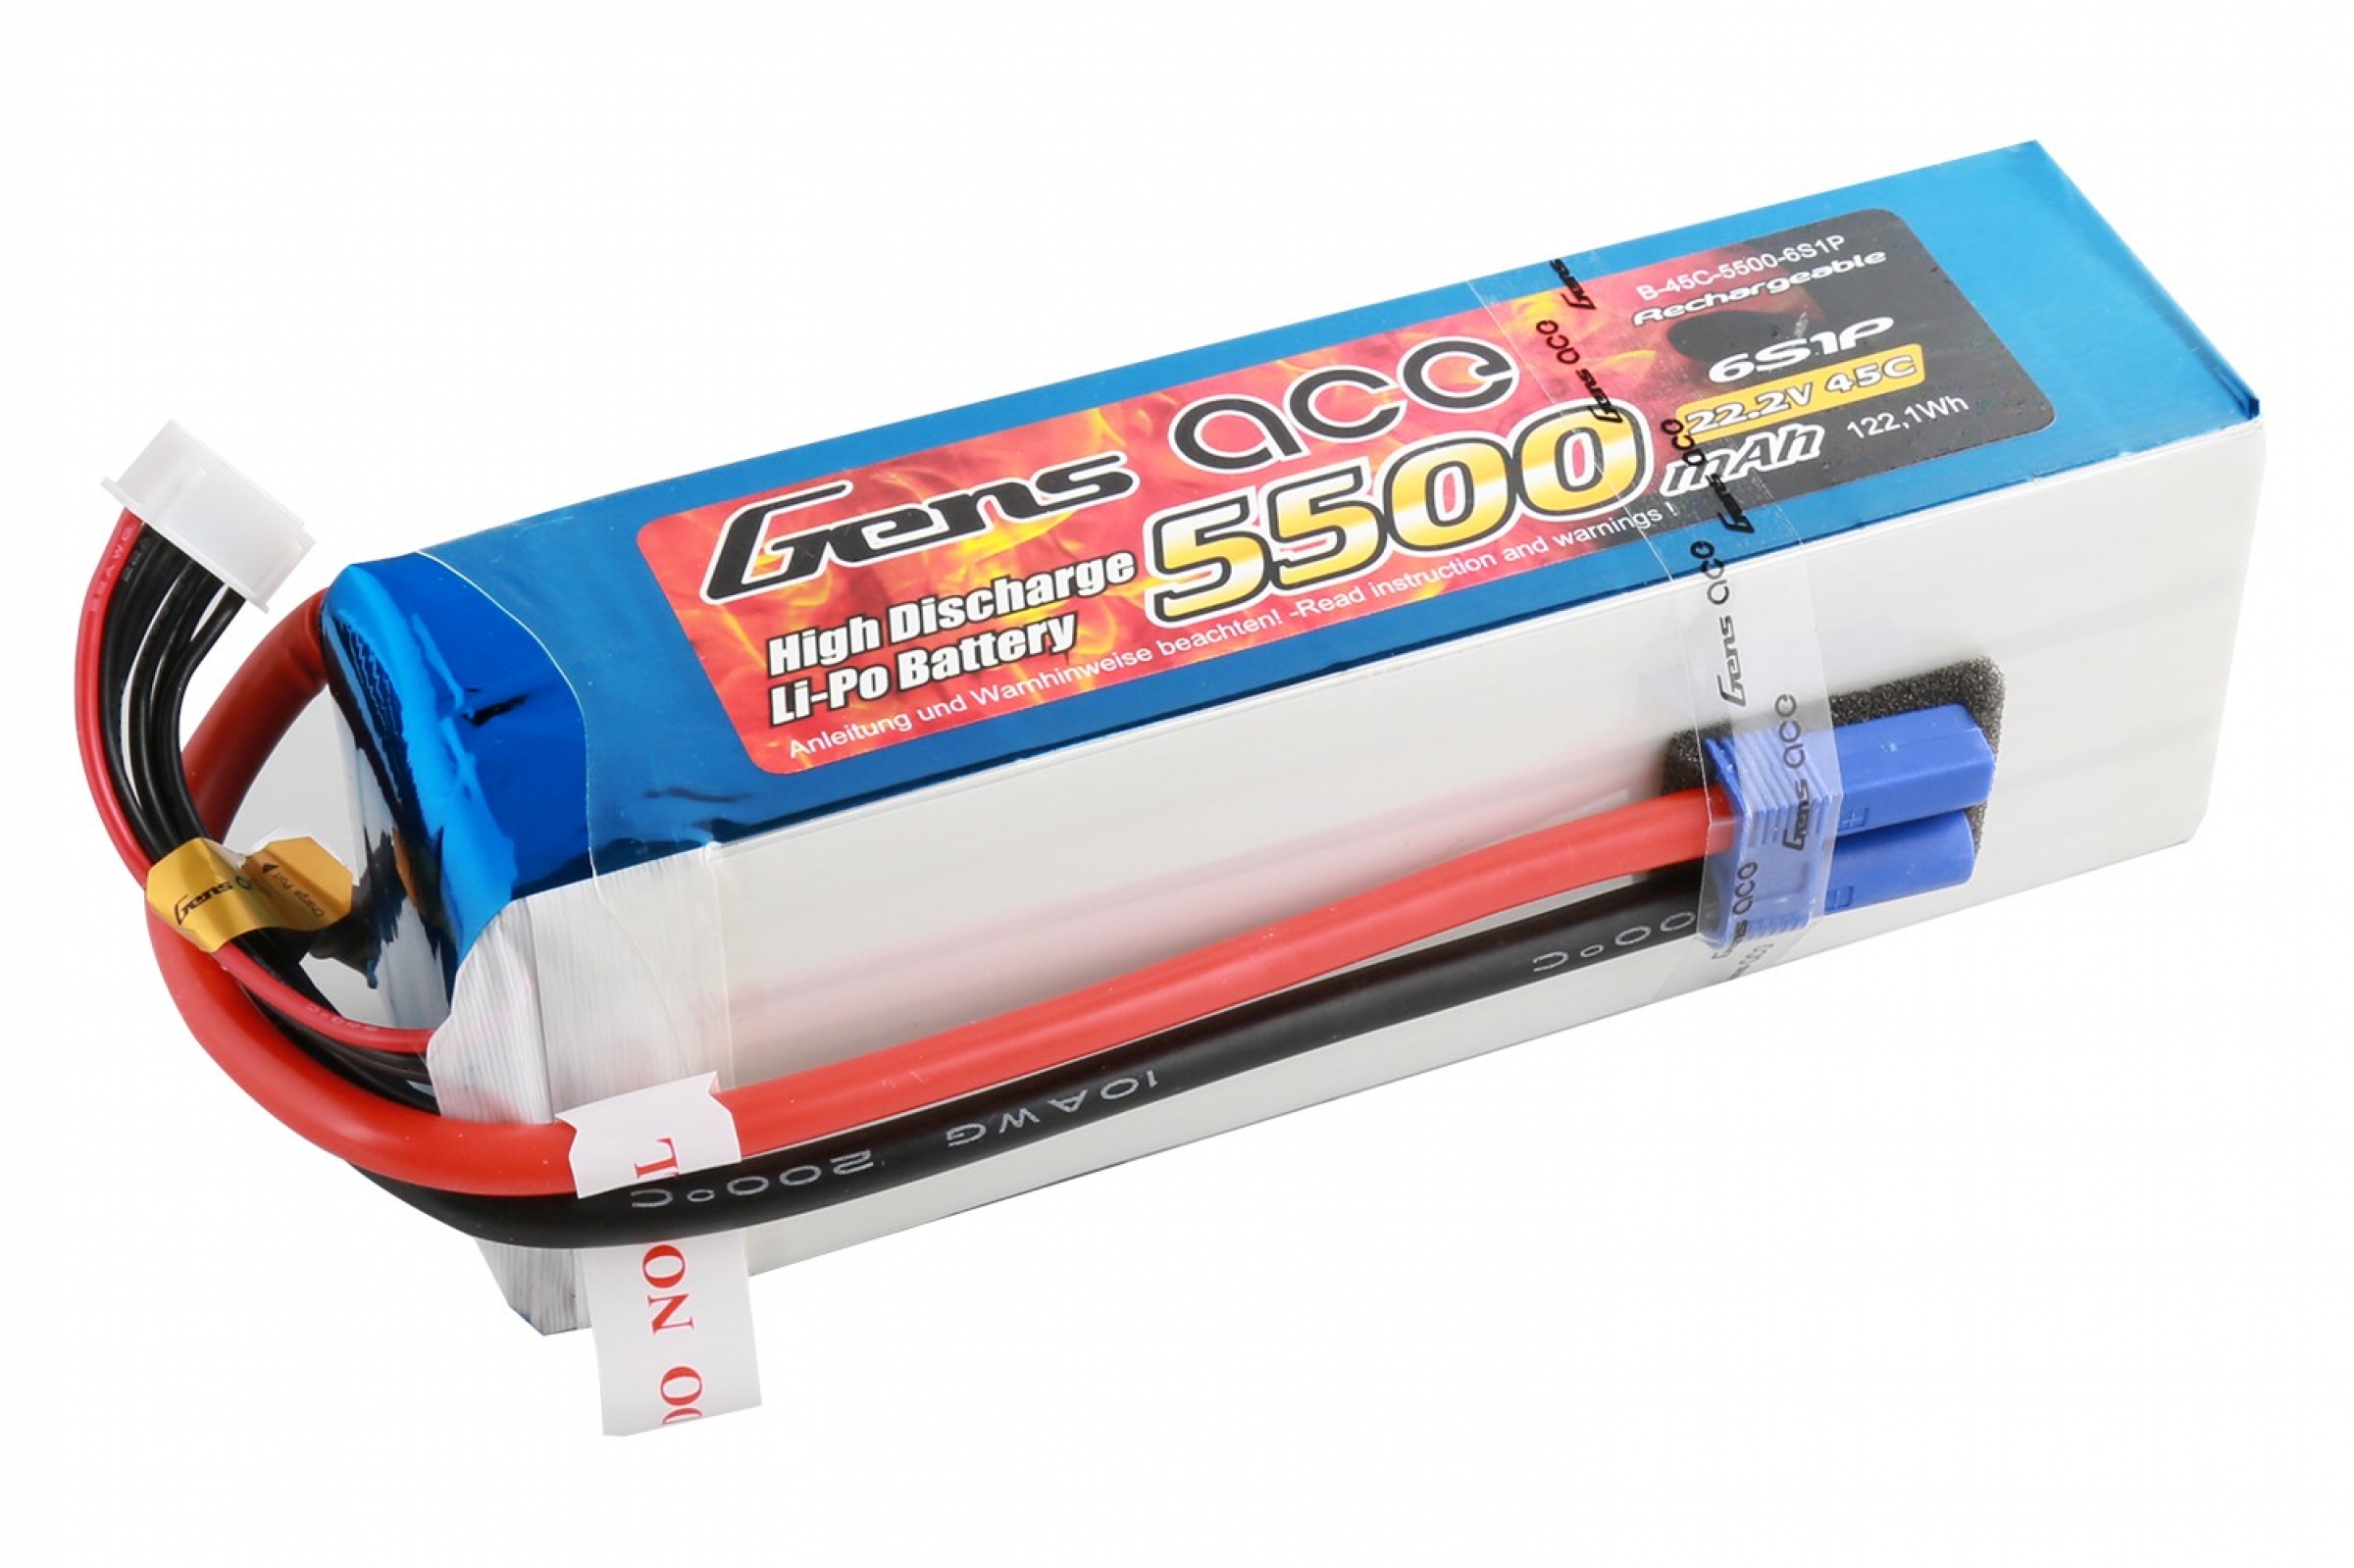 Grepow 5500mAh 22.2V 45C 6S1P battery with EC5 connector